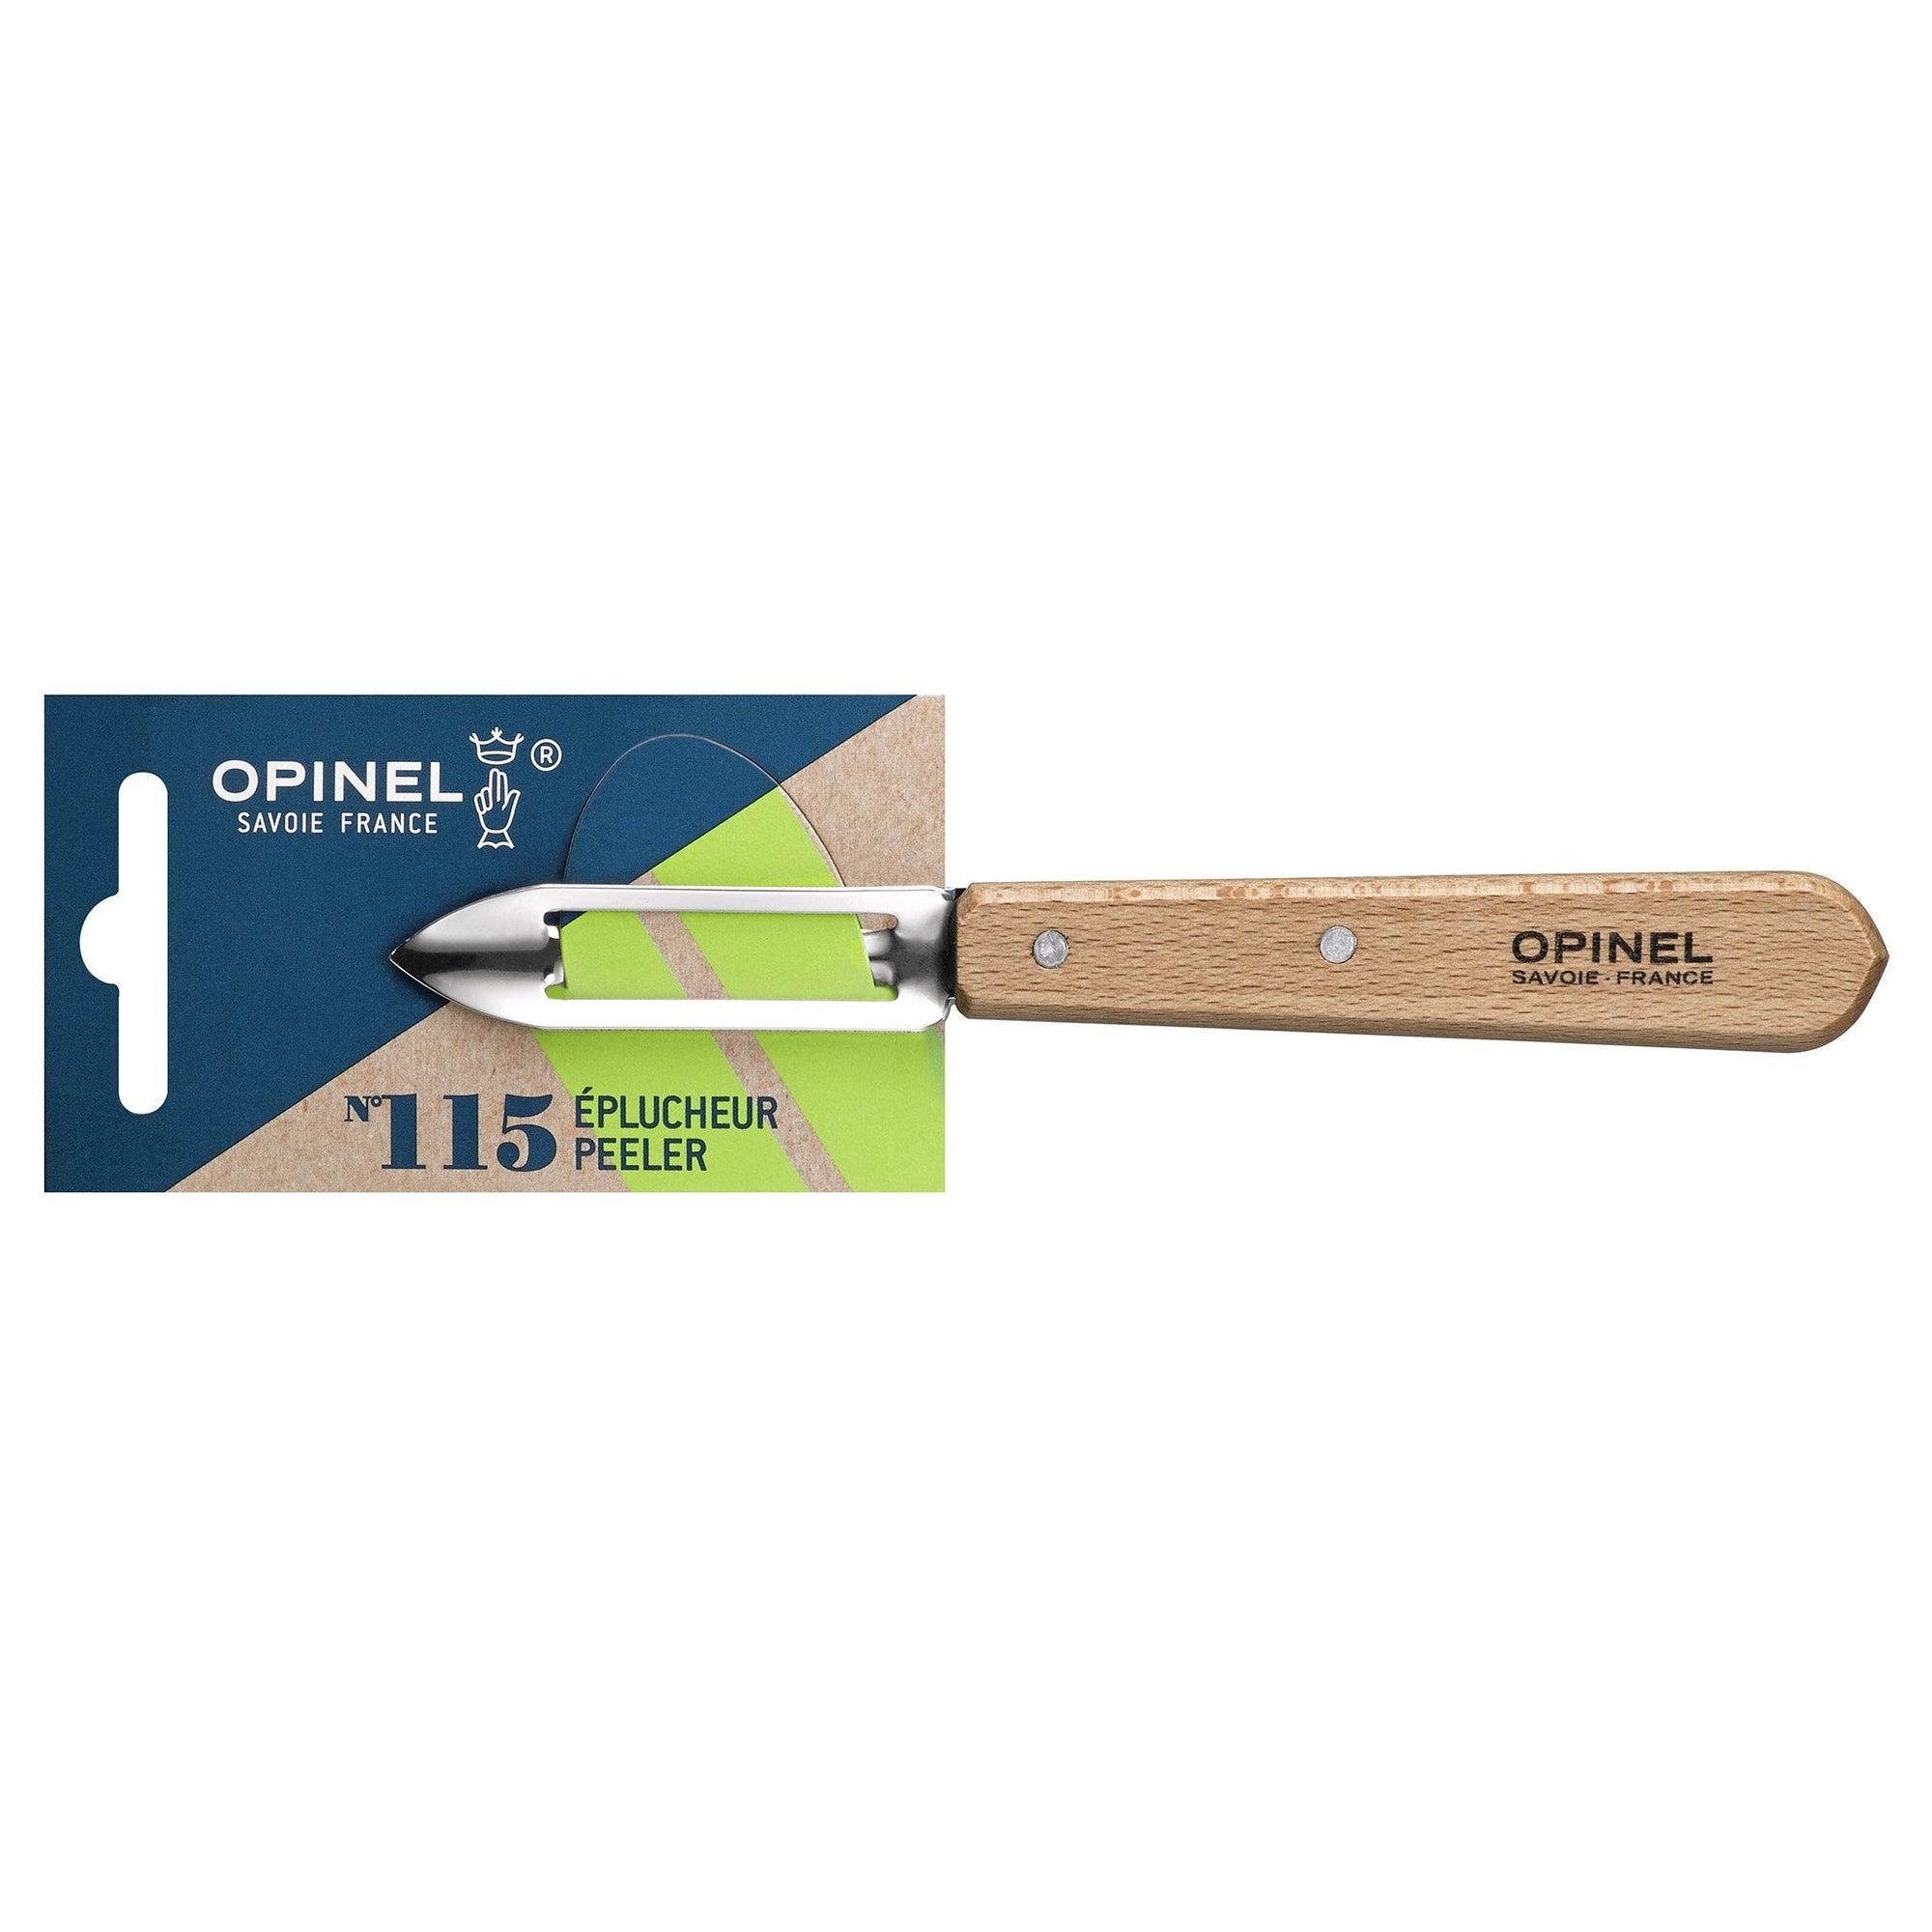 OPINEL ESSENTIAL SMALL KITCHEN KNIFE SET 1950s (001452) - BRAND